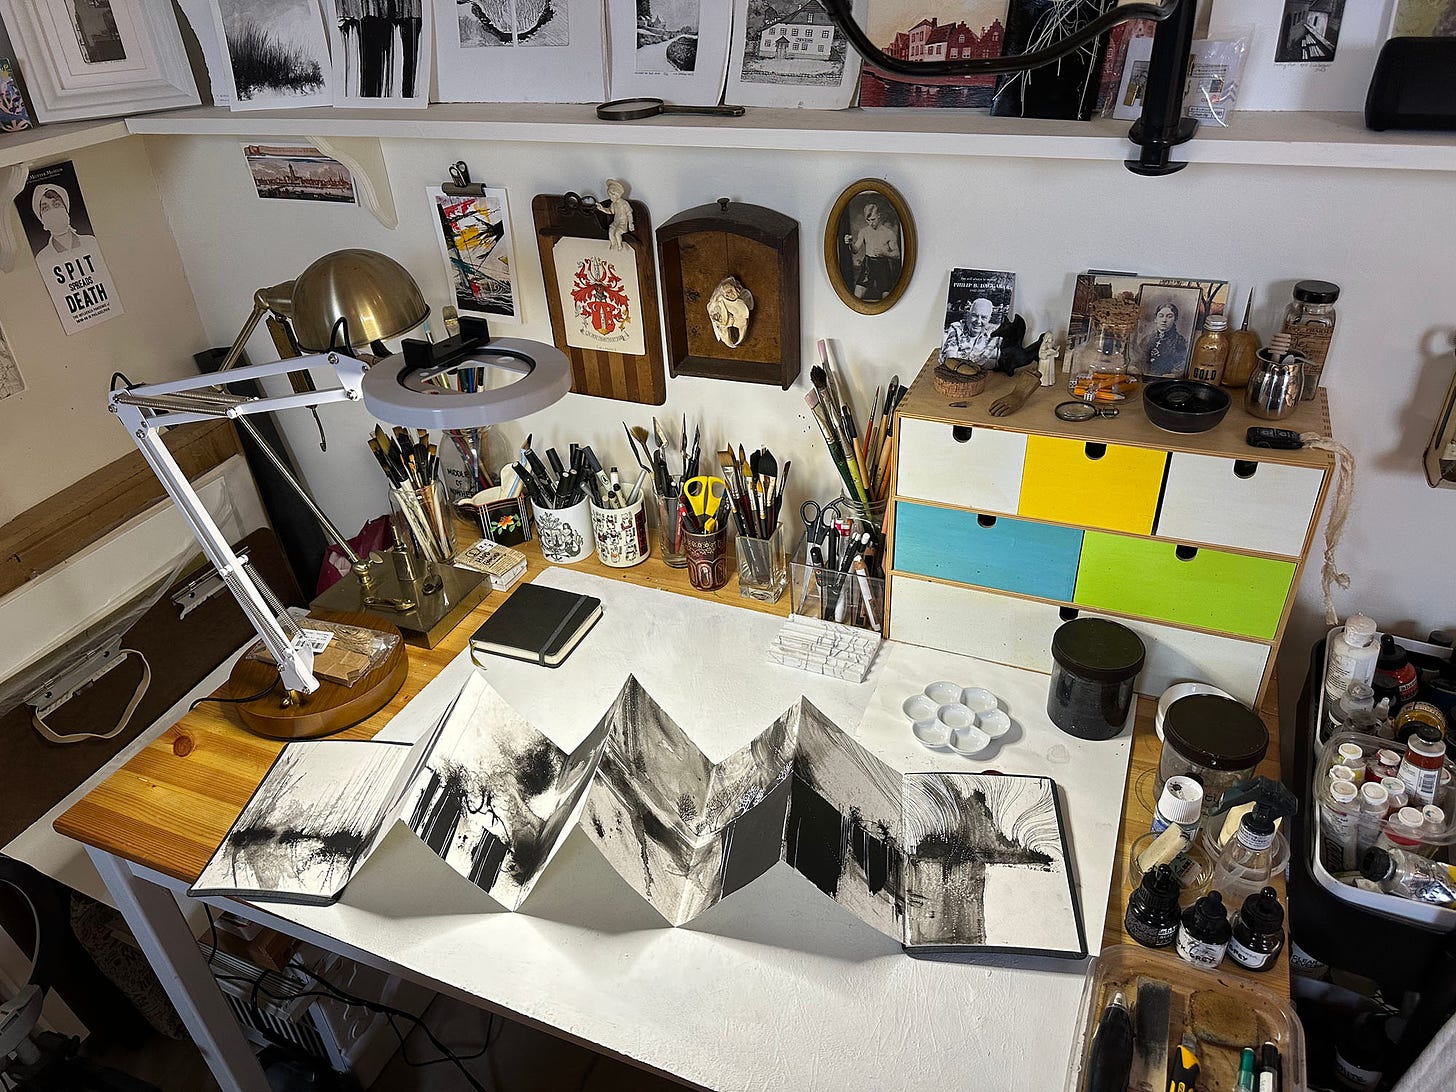 Photo of my desk, taken from a high angle. A semi- open accordian-shaped sketchbook is lying across the desk, showing black and white abstract black and white ink paintings. Loads of art supplies are around the edges of the desk, including many jars holding pens, pencils, brushes. A ring light sits to the left side of the desk, and lots of art rests on a slender shelf above the desk.